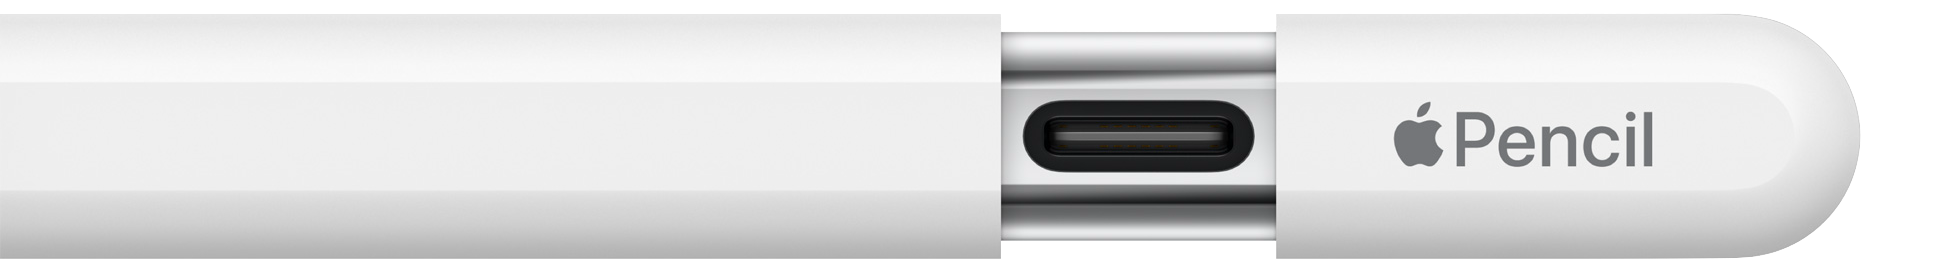 USB-C Apple Pencil with sliding cover